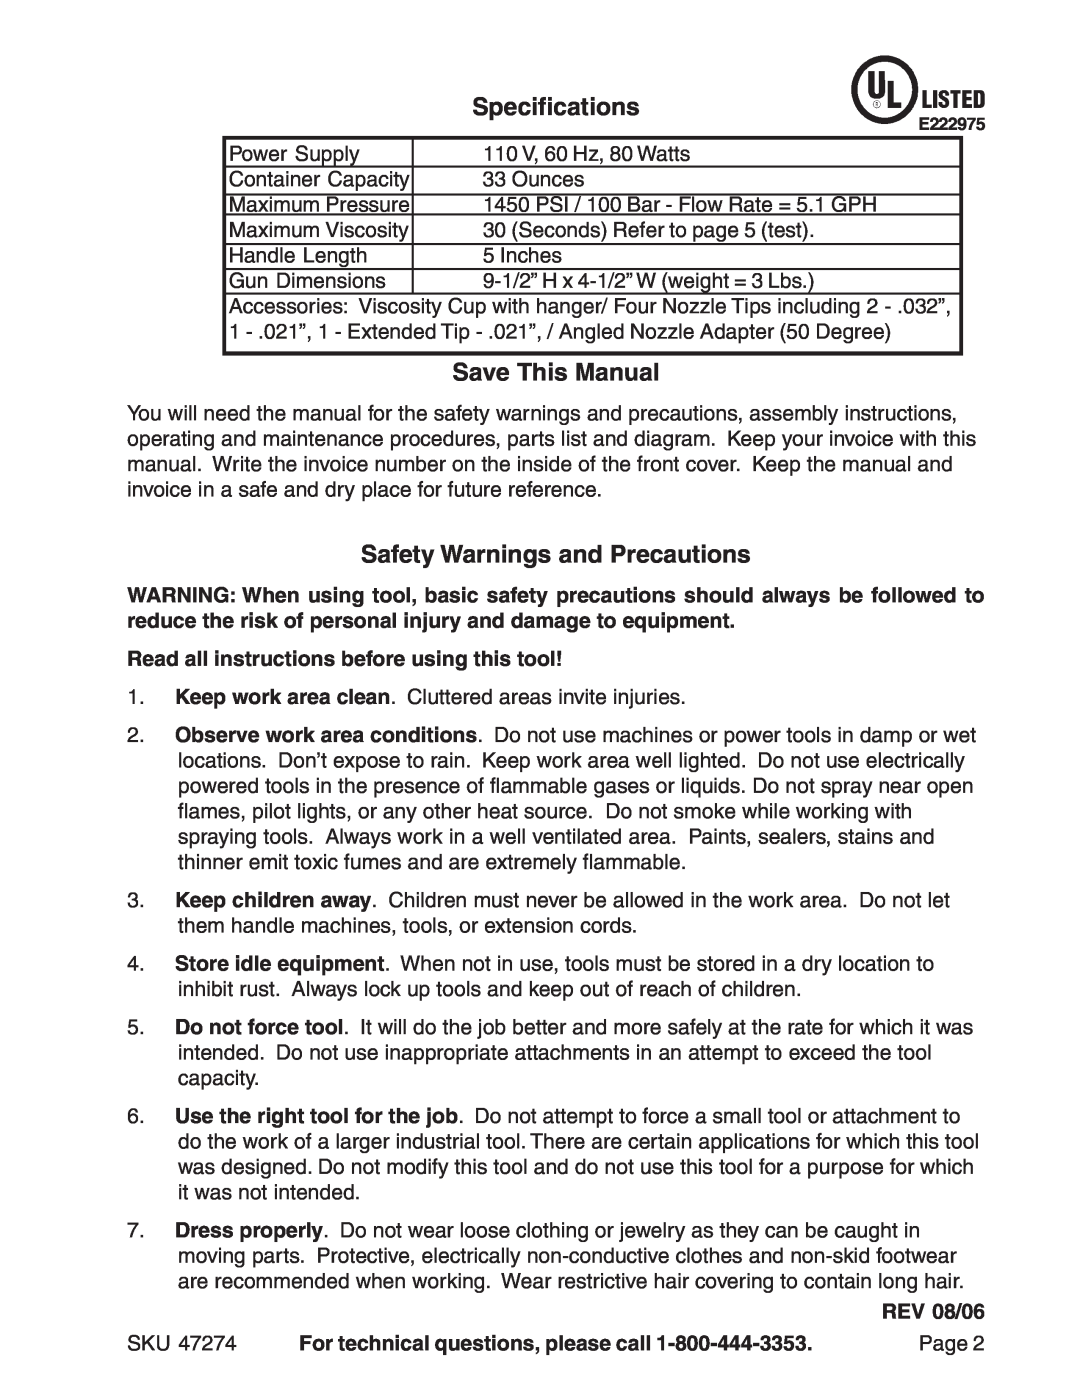 Harbor Freight Tools 47274 Specifications, Save This Manual, Safety Warnings and Precautions, REV 08/06 